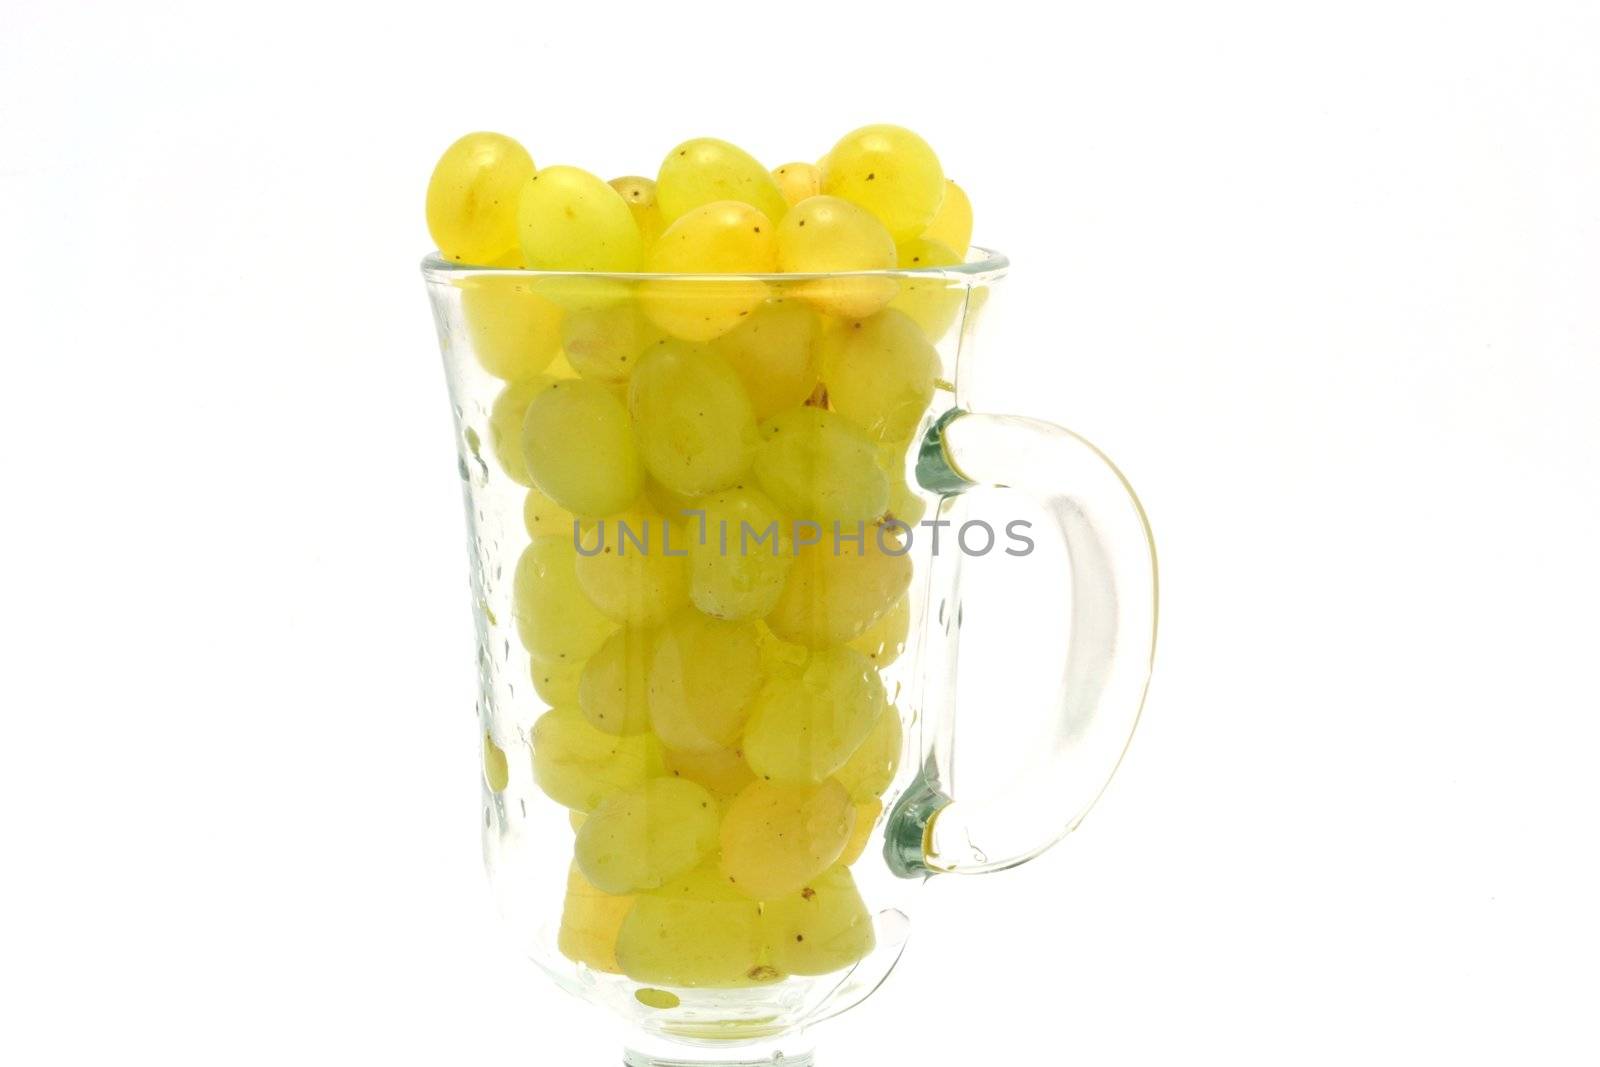 Cup of grapes by Autre